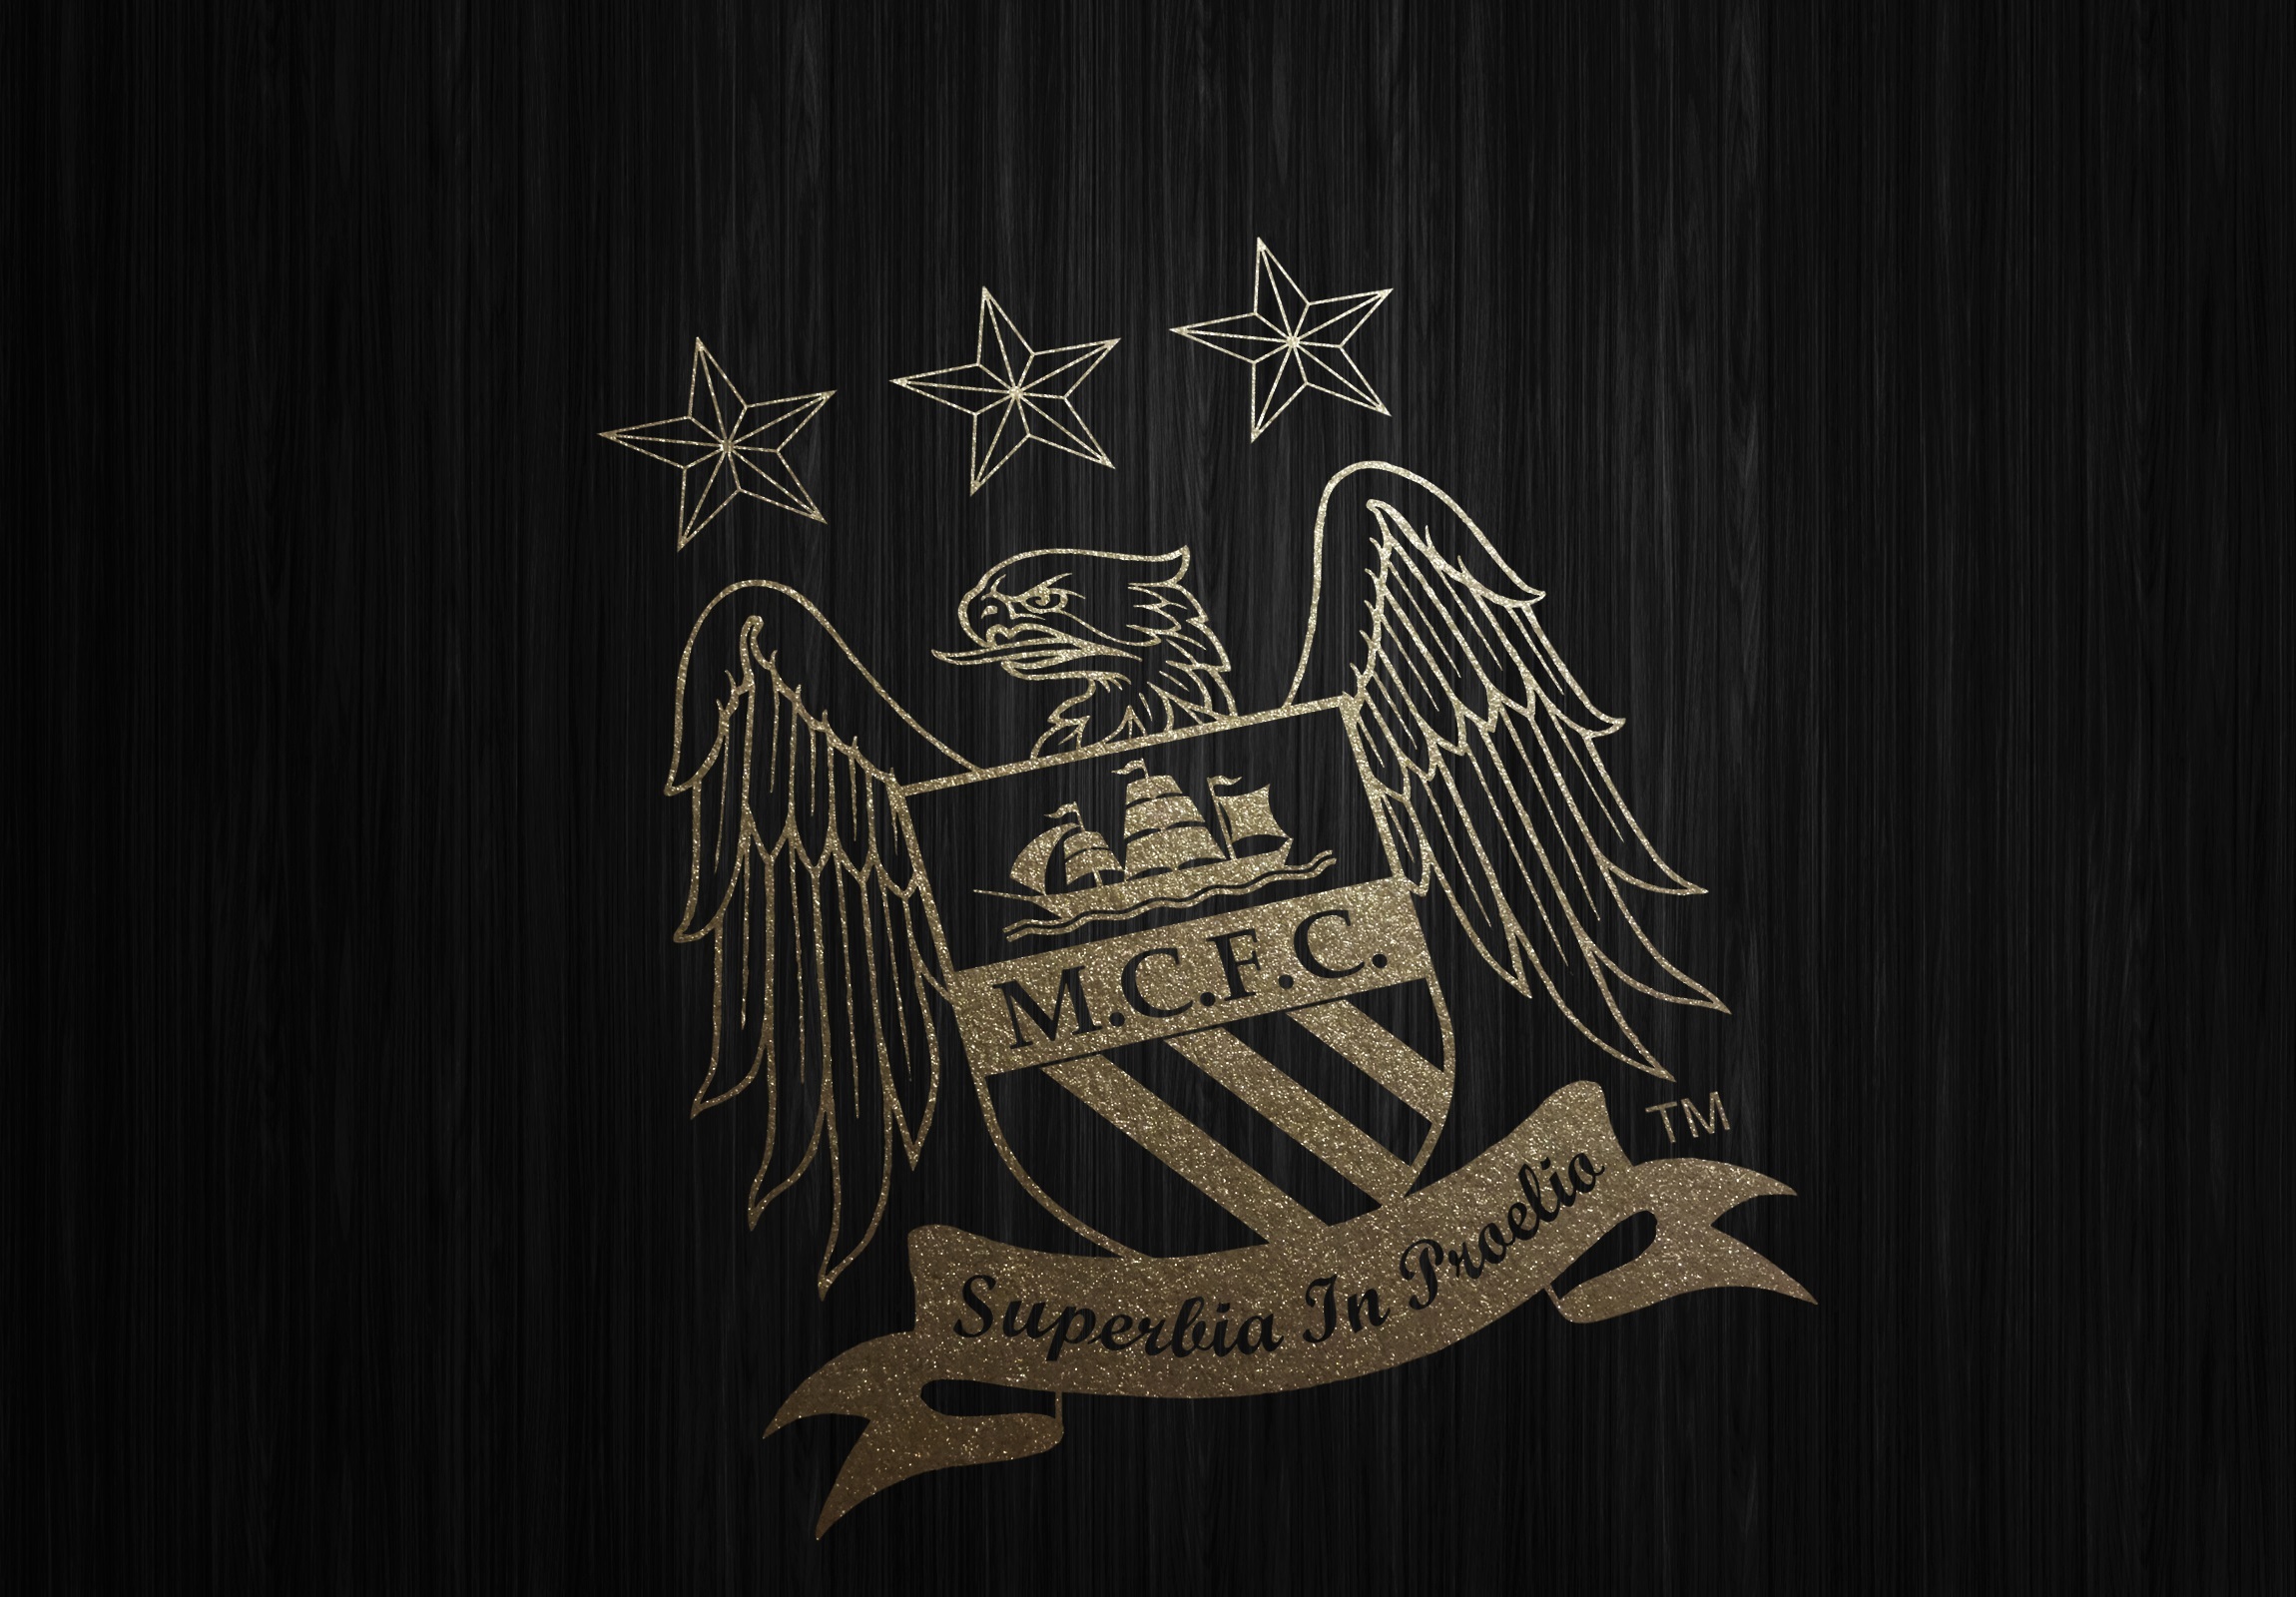 Sports Manchester City F.C. HD Wallpaper | Background Image